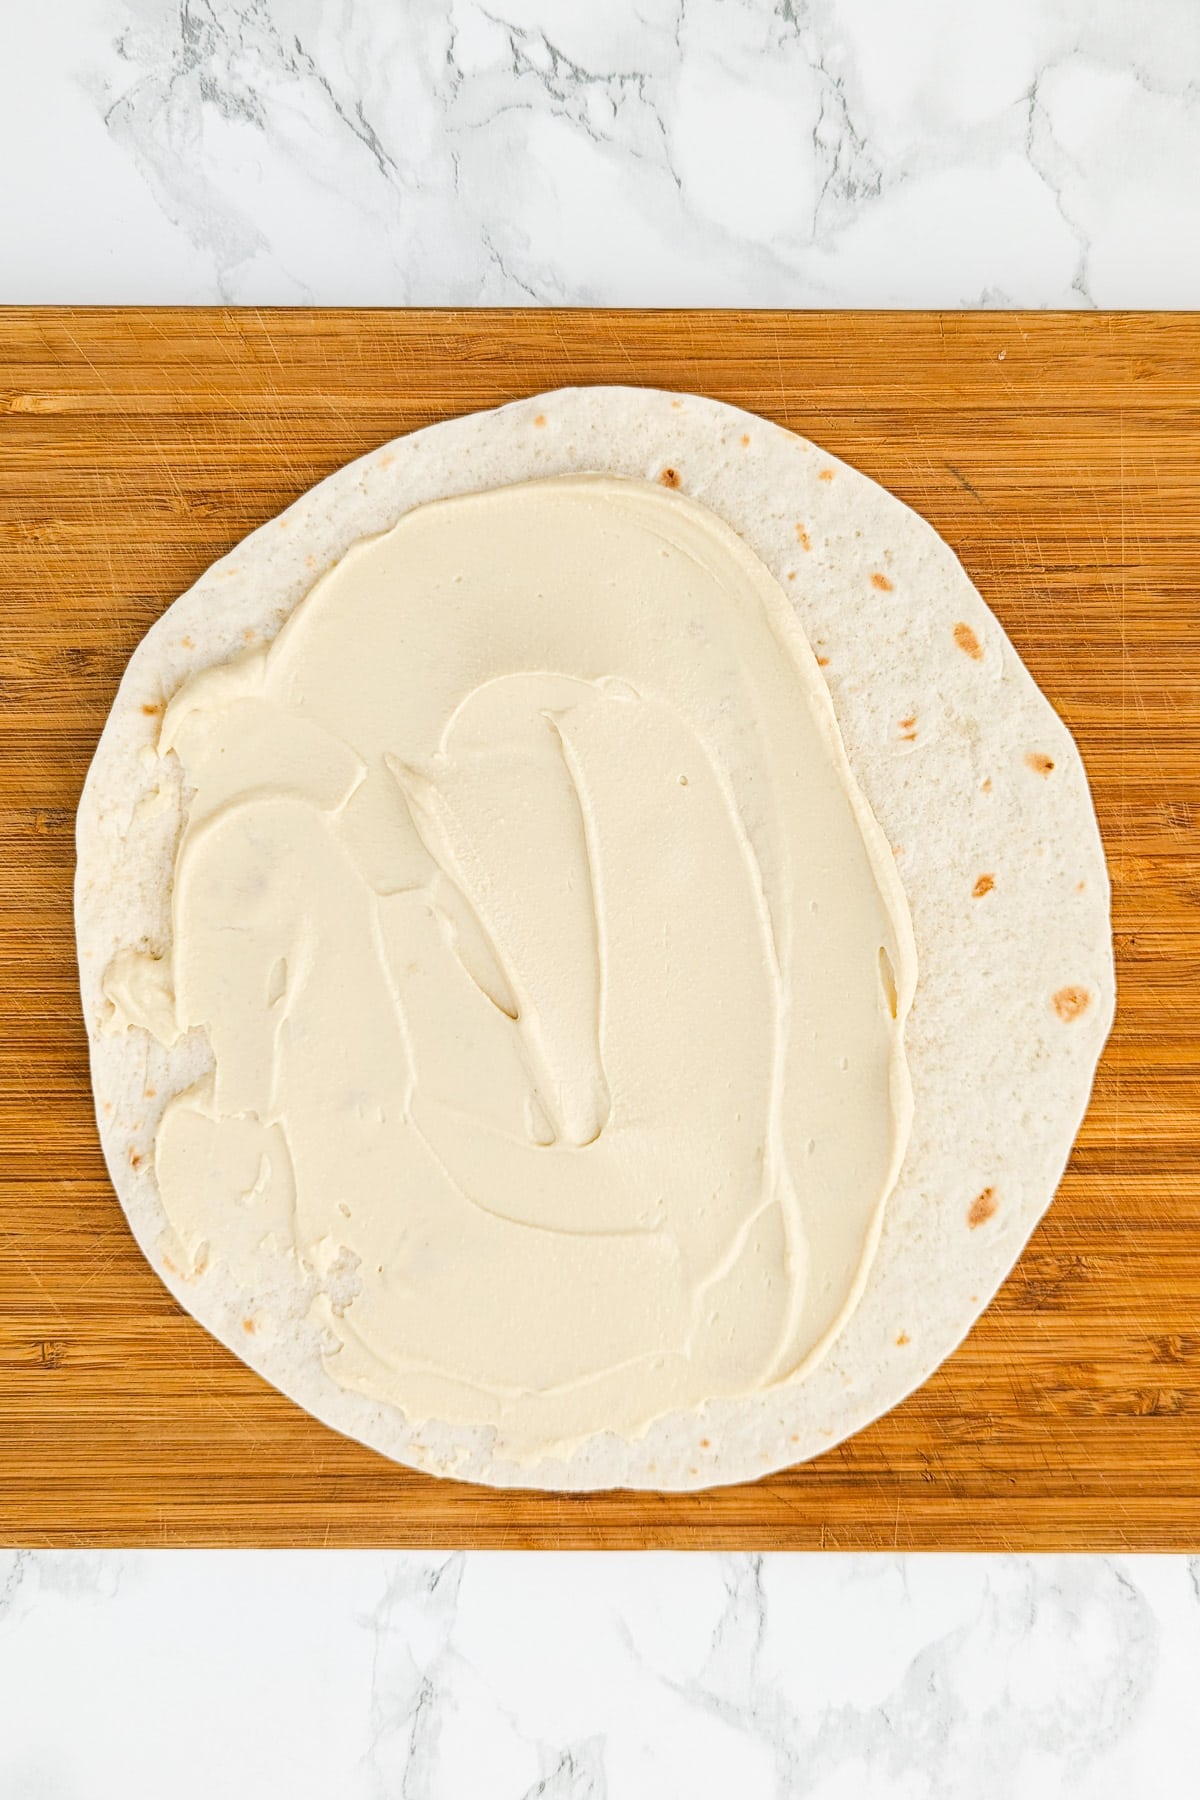 Top view of a wooden cutting board with a pita and cream on it.